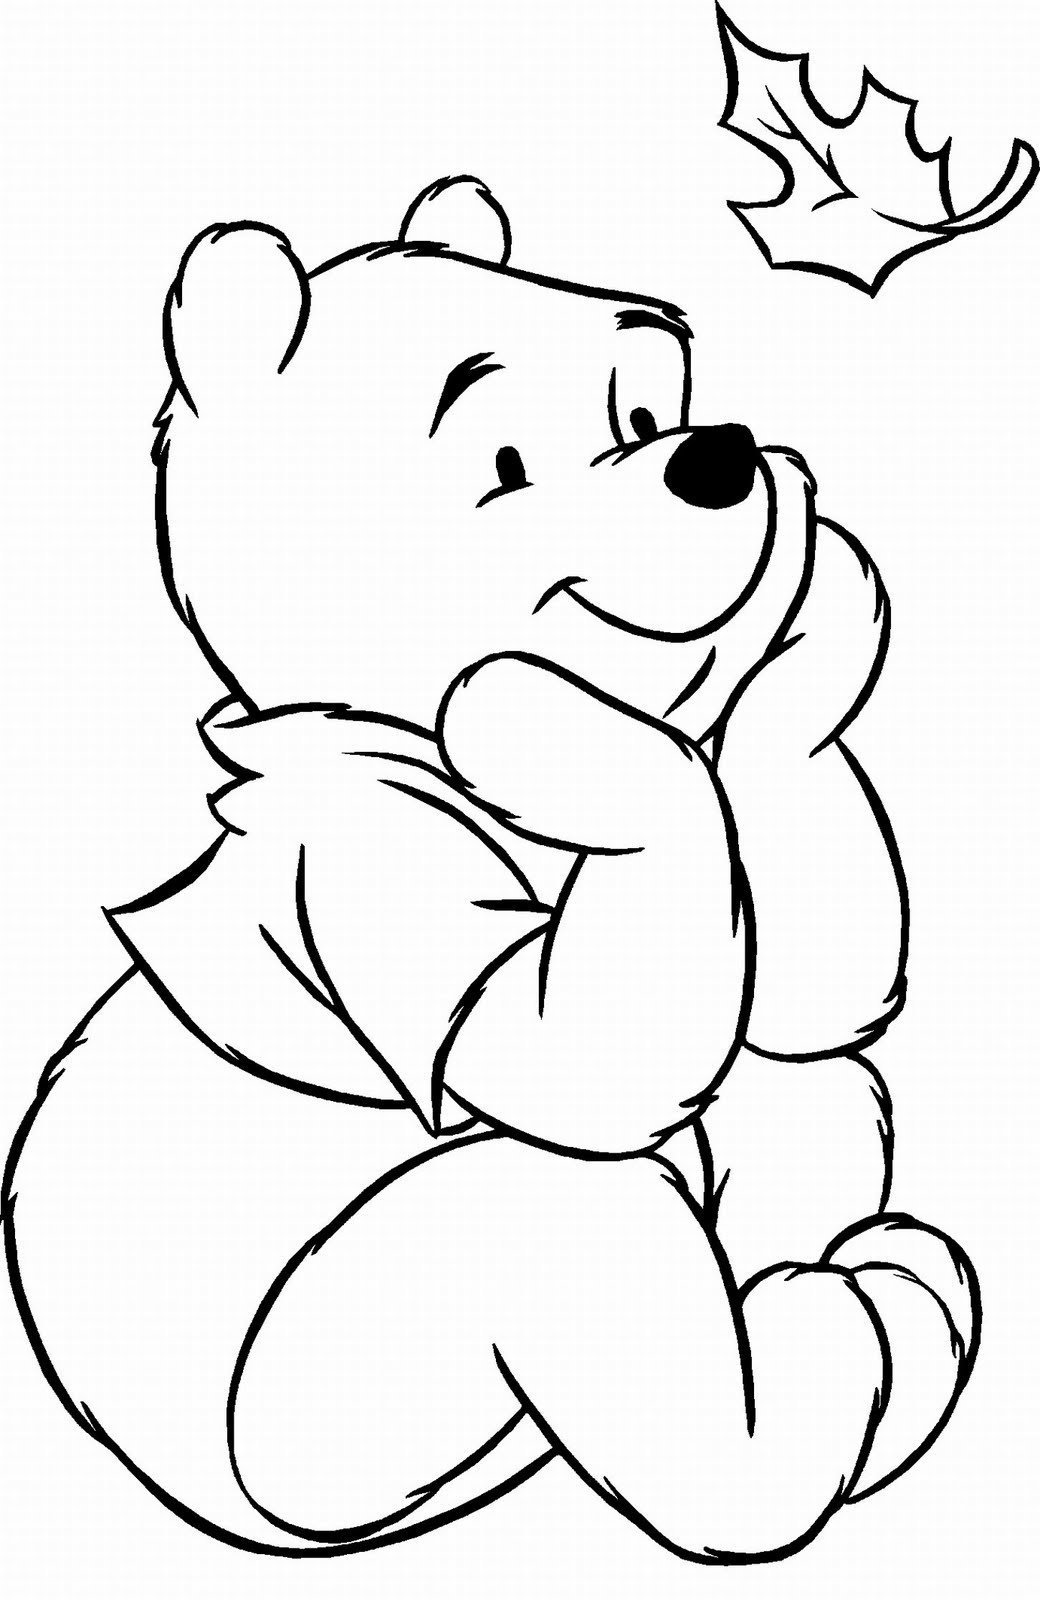 Cartoon Coloring Pages Disney - Cartoon Coloring Pages